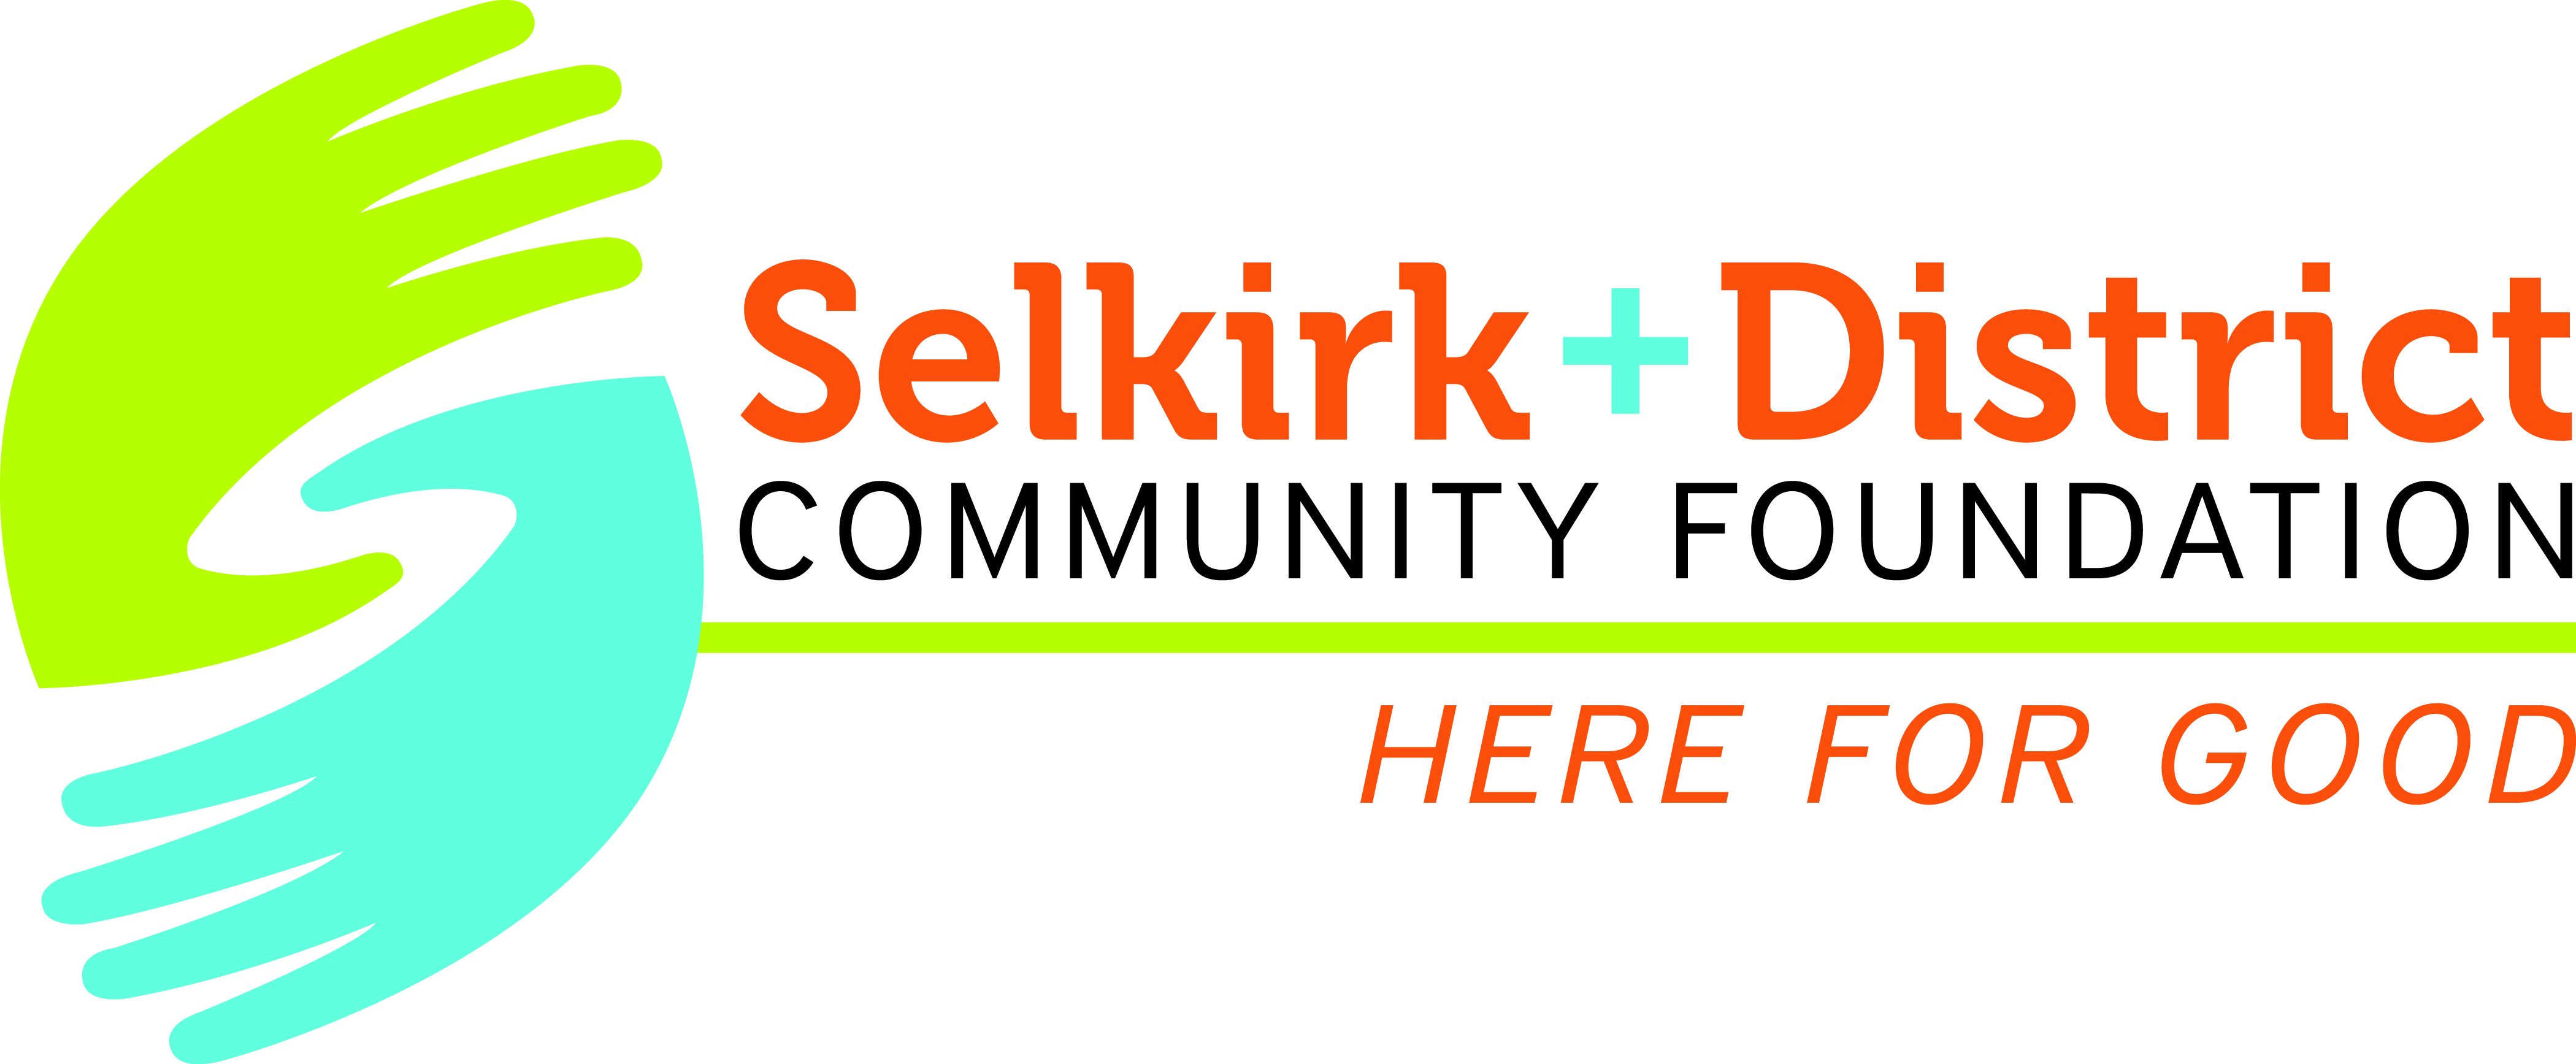 Selkirk and District Community Foundation logo